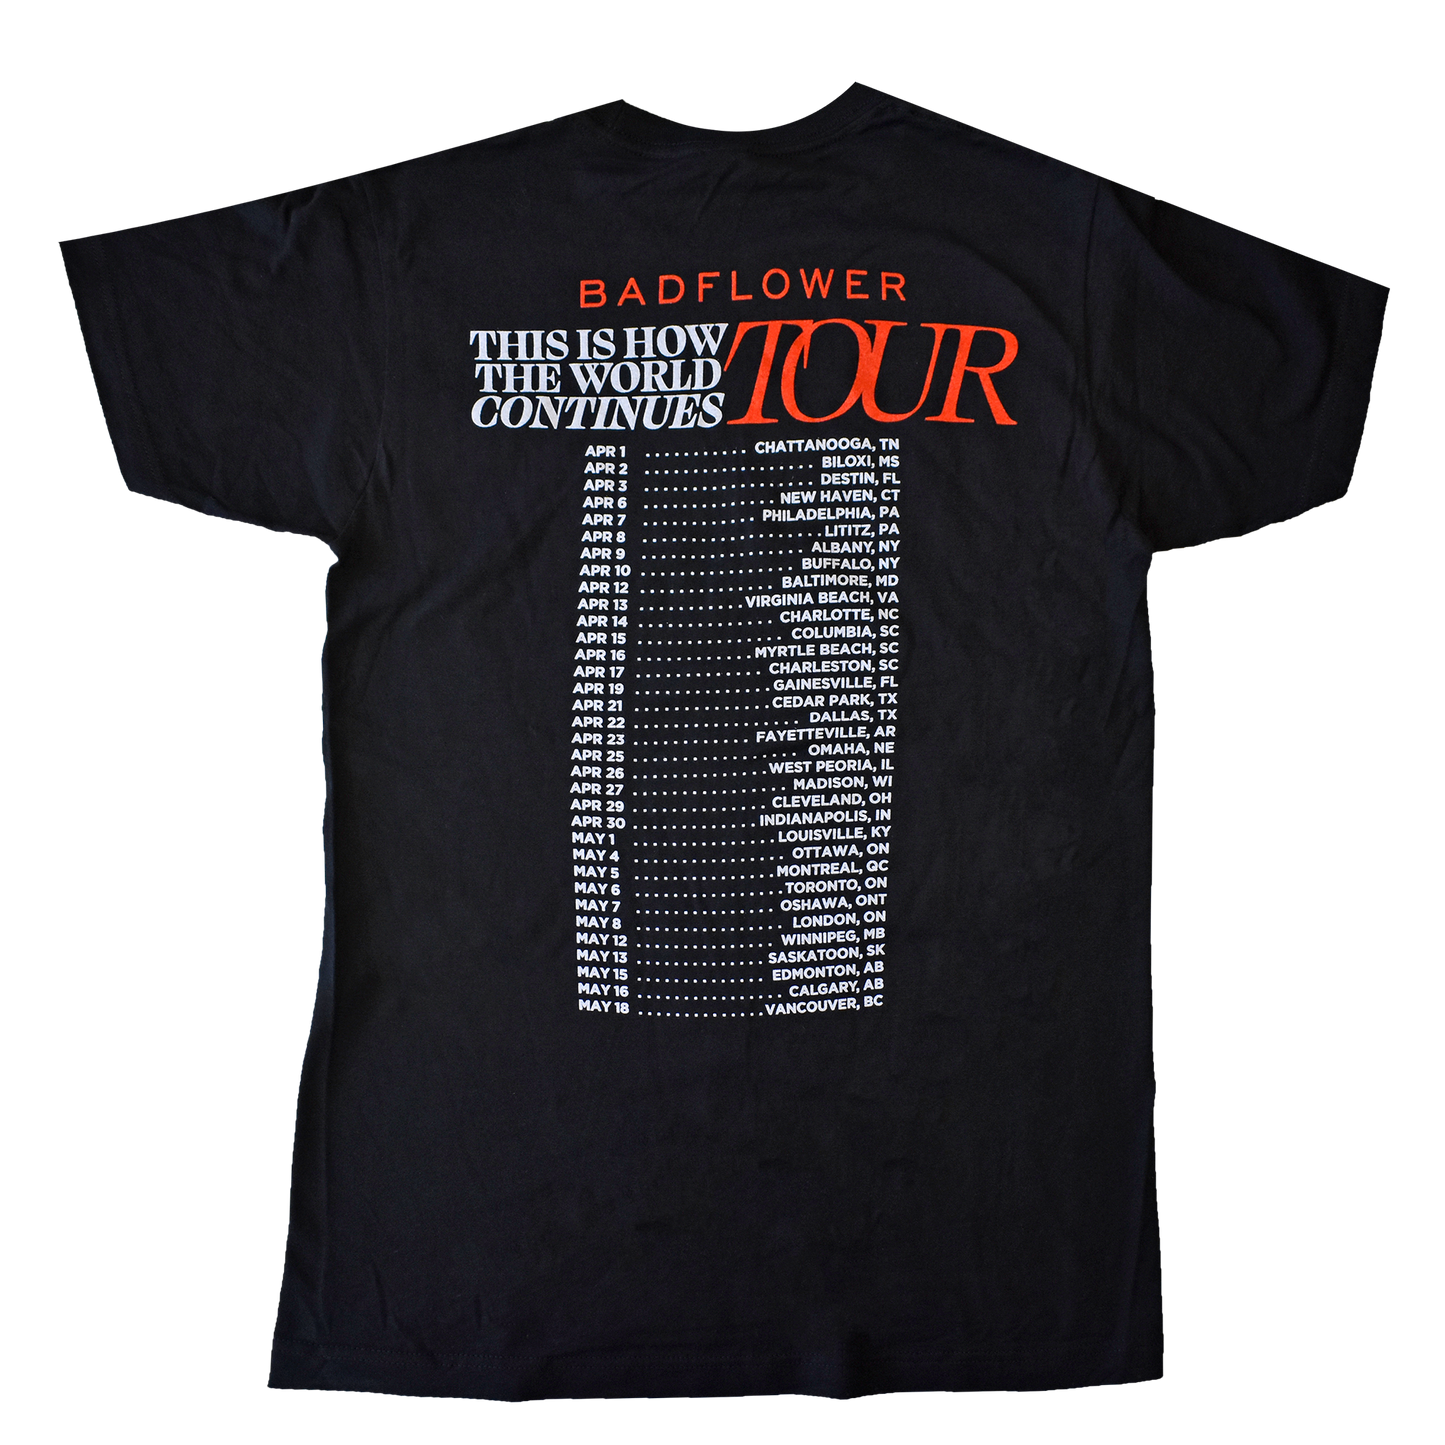 This is how the world continues Tour Tee back